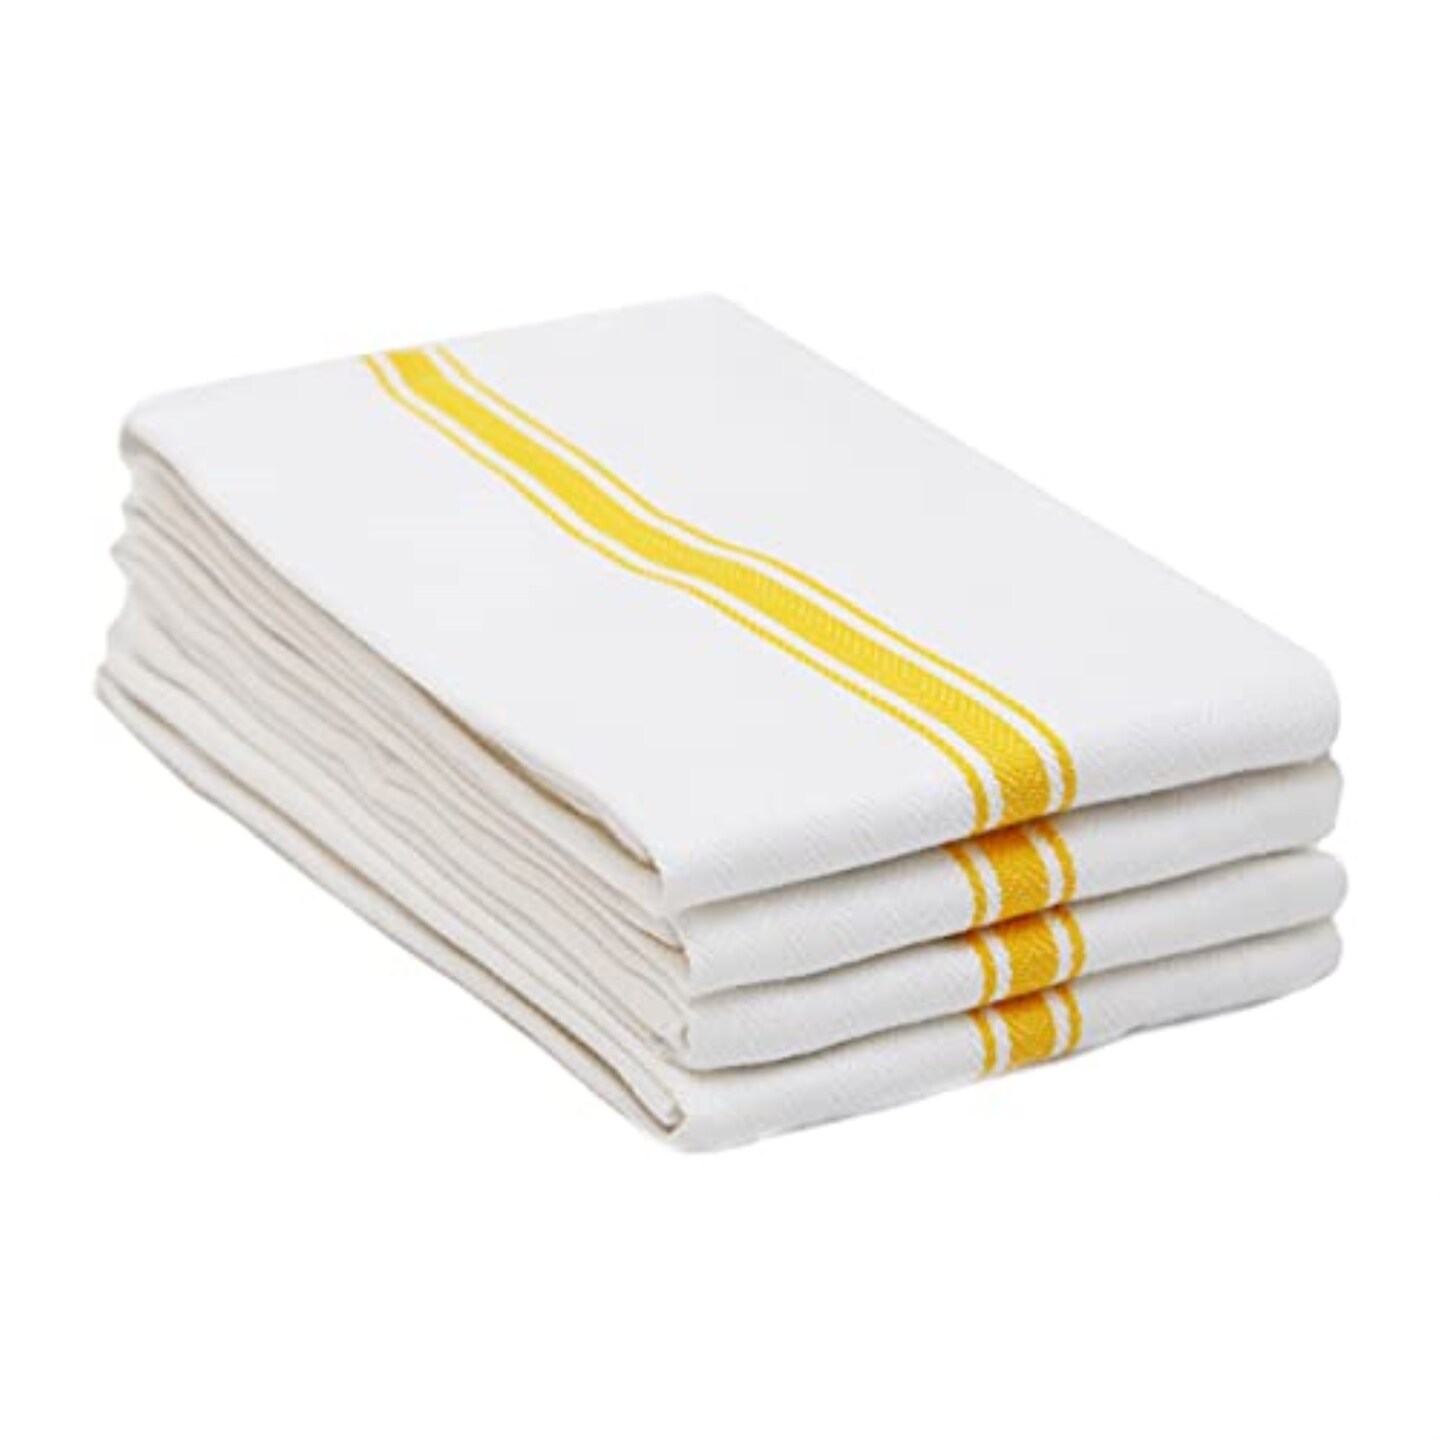 Yellow Kitchen Towels at